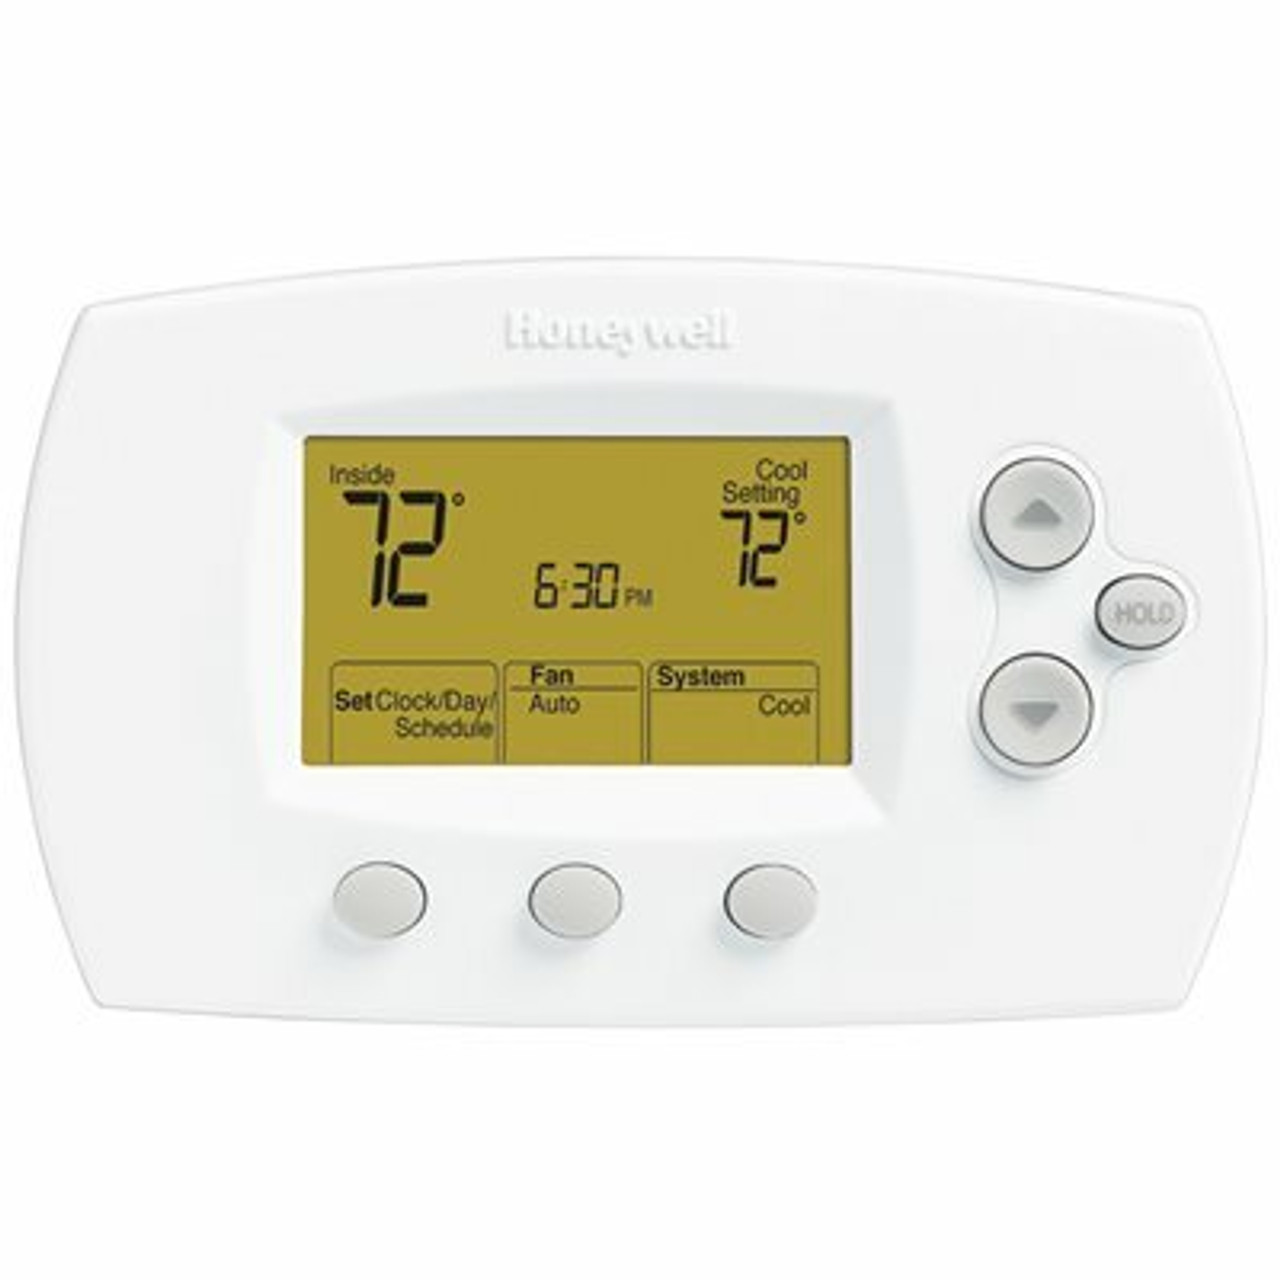 Honeywell Home Focuspro 6000 5-1-1 Day Digital Programmable Thermostat 2 Heat/ 2 Cool